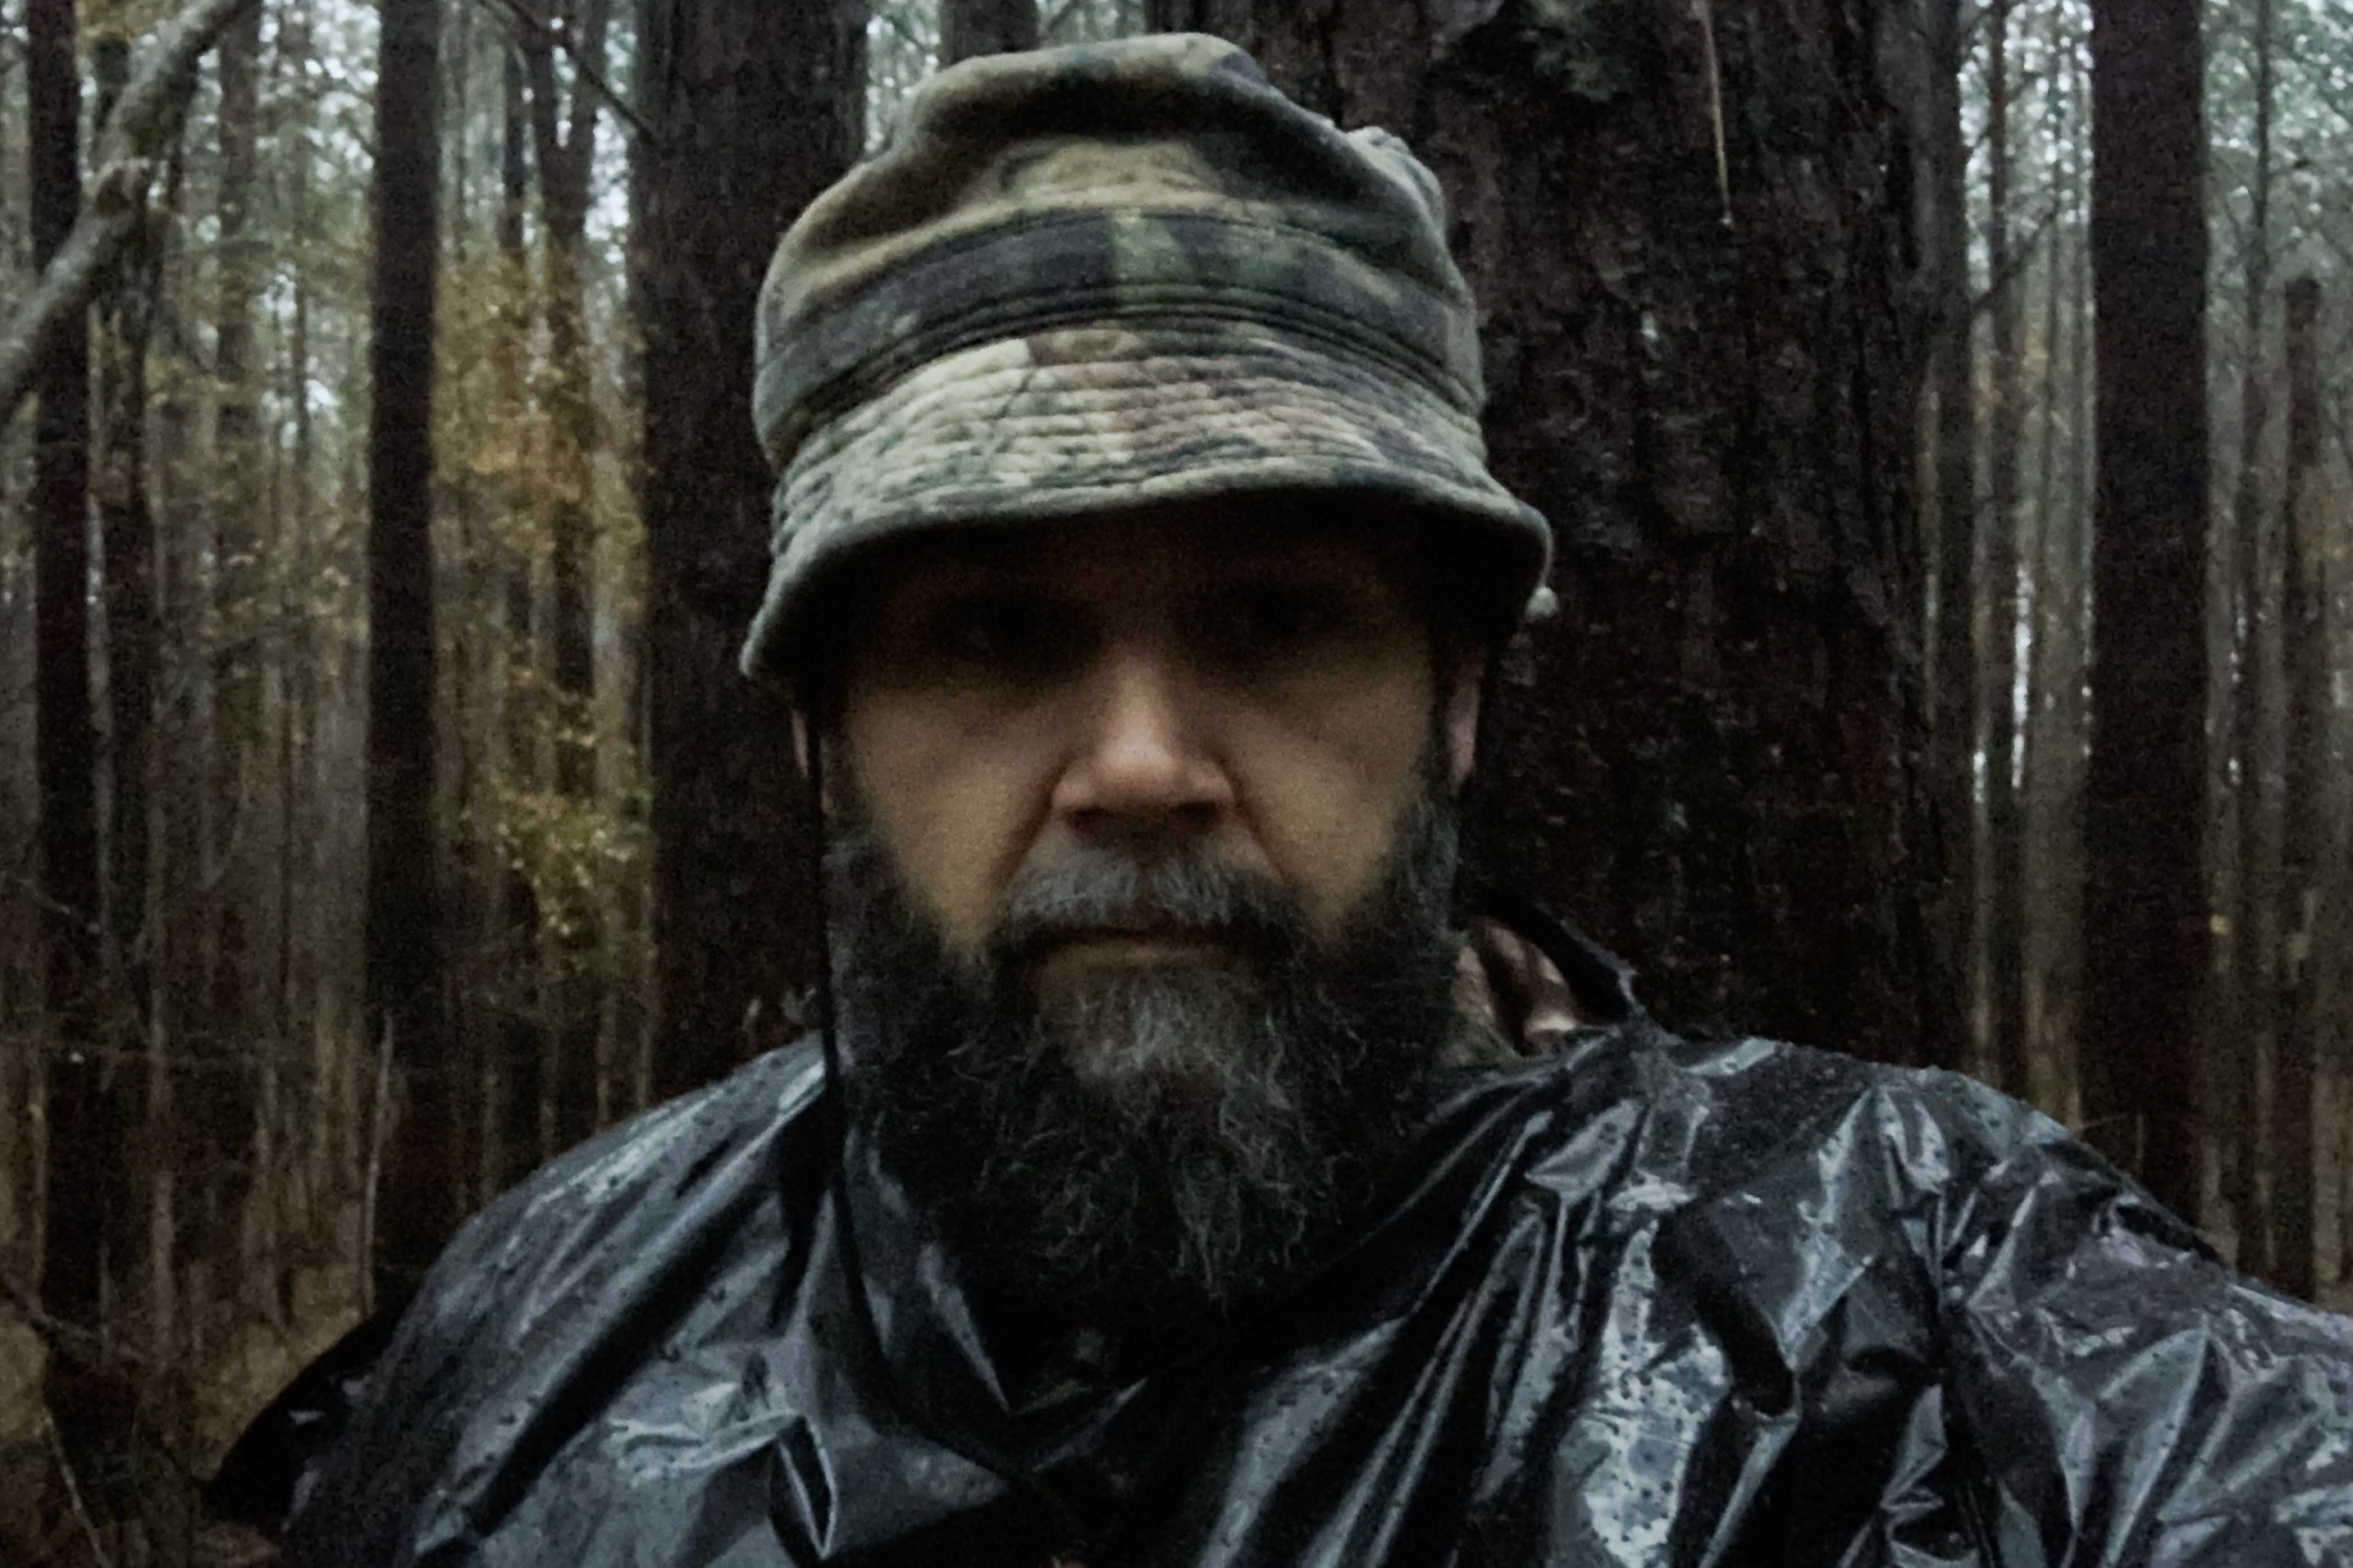 Self portrait from the stand, in the rain at sunrise